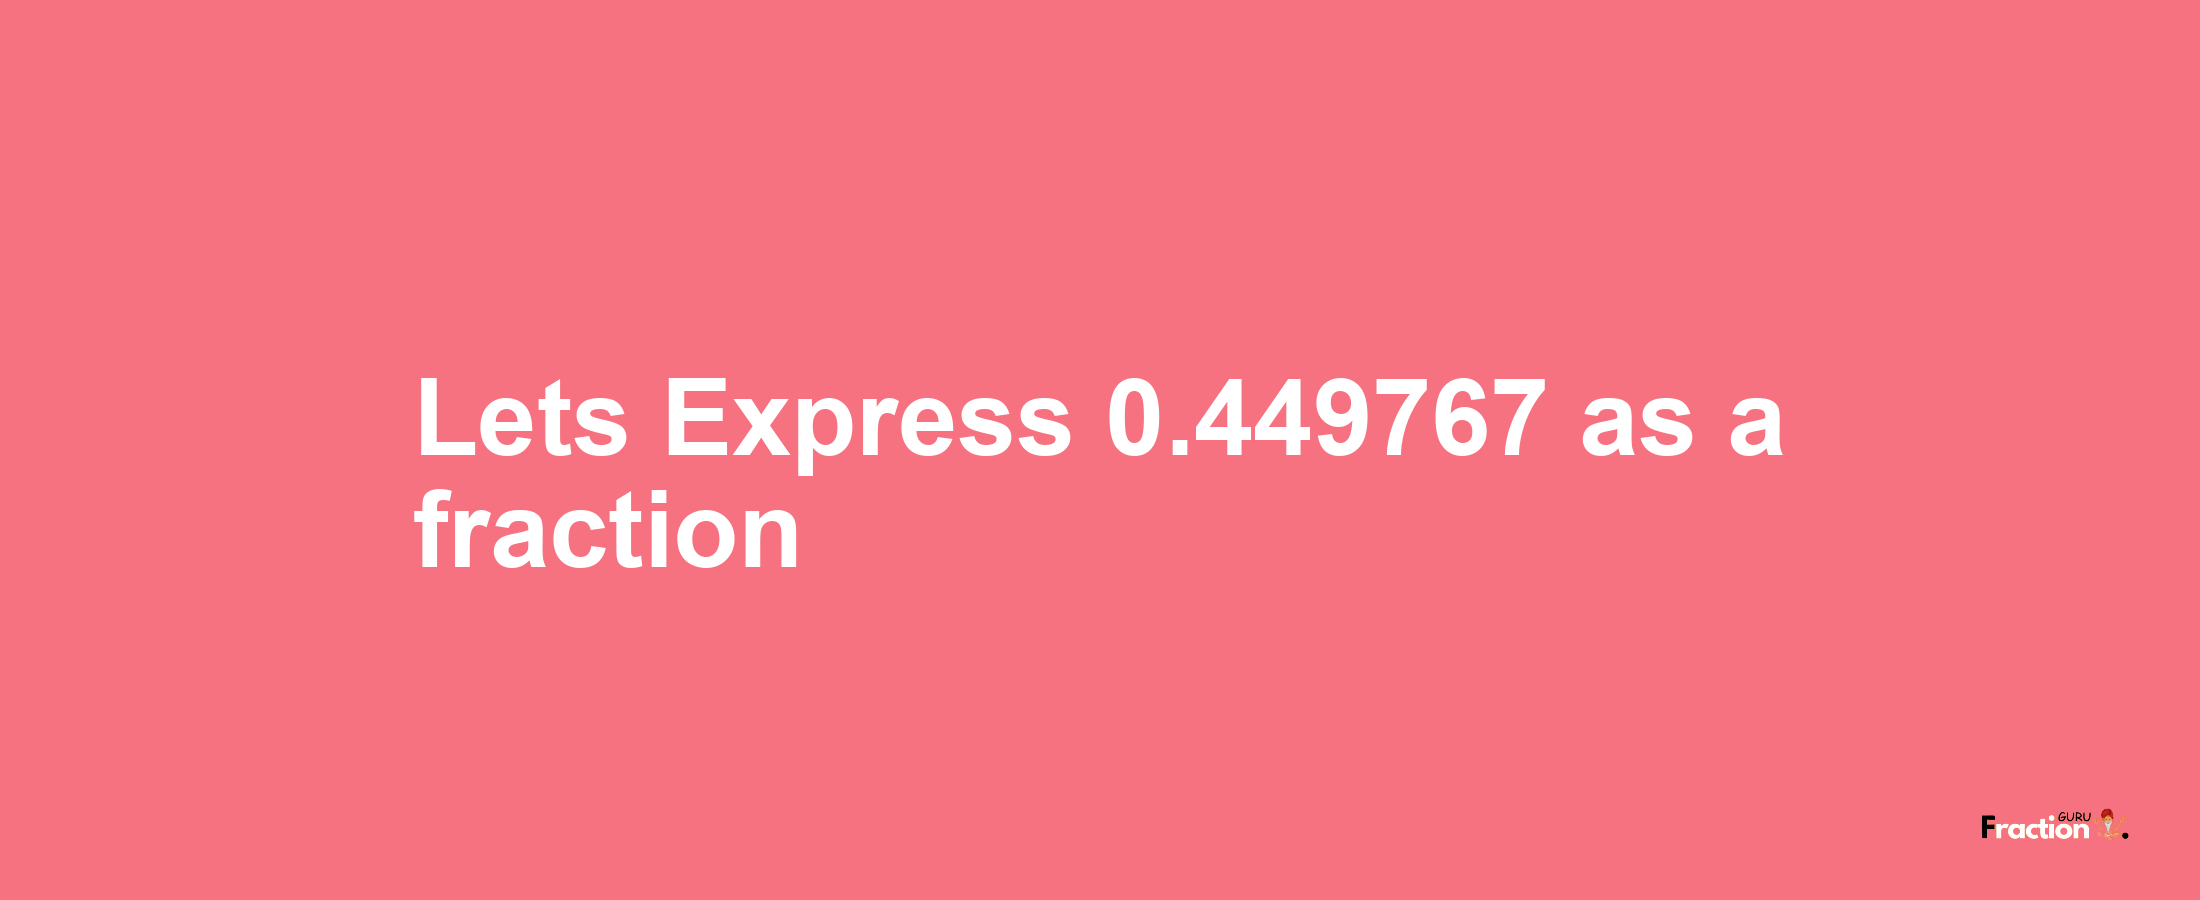 Lets Express 0.449767 as afraction